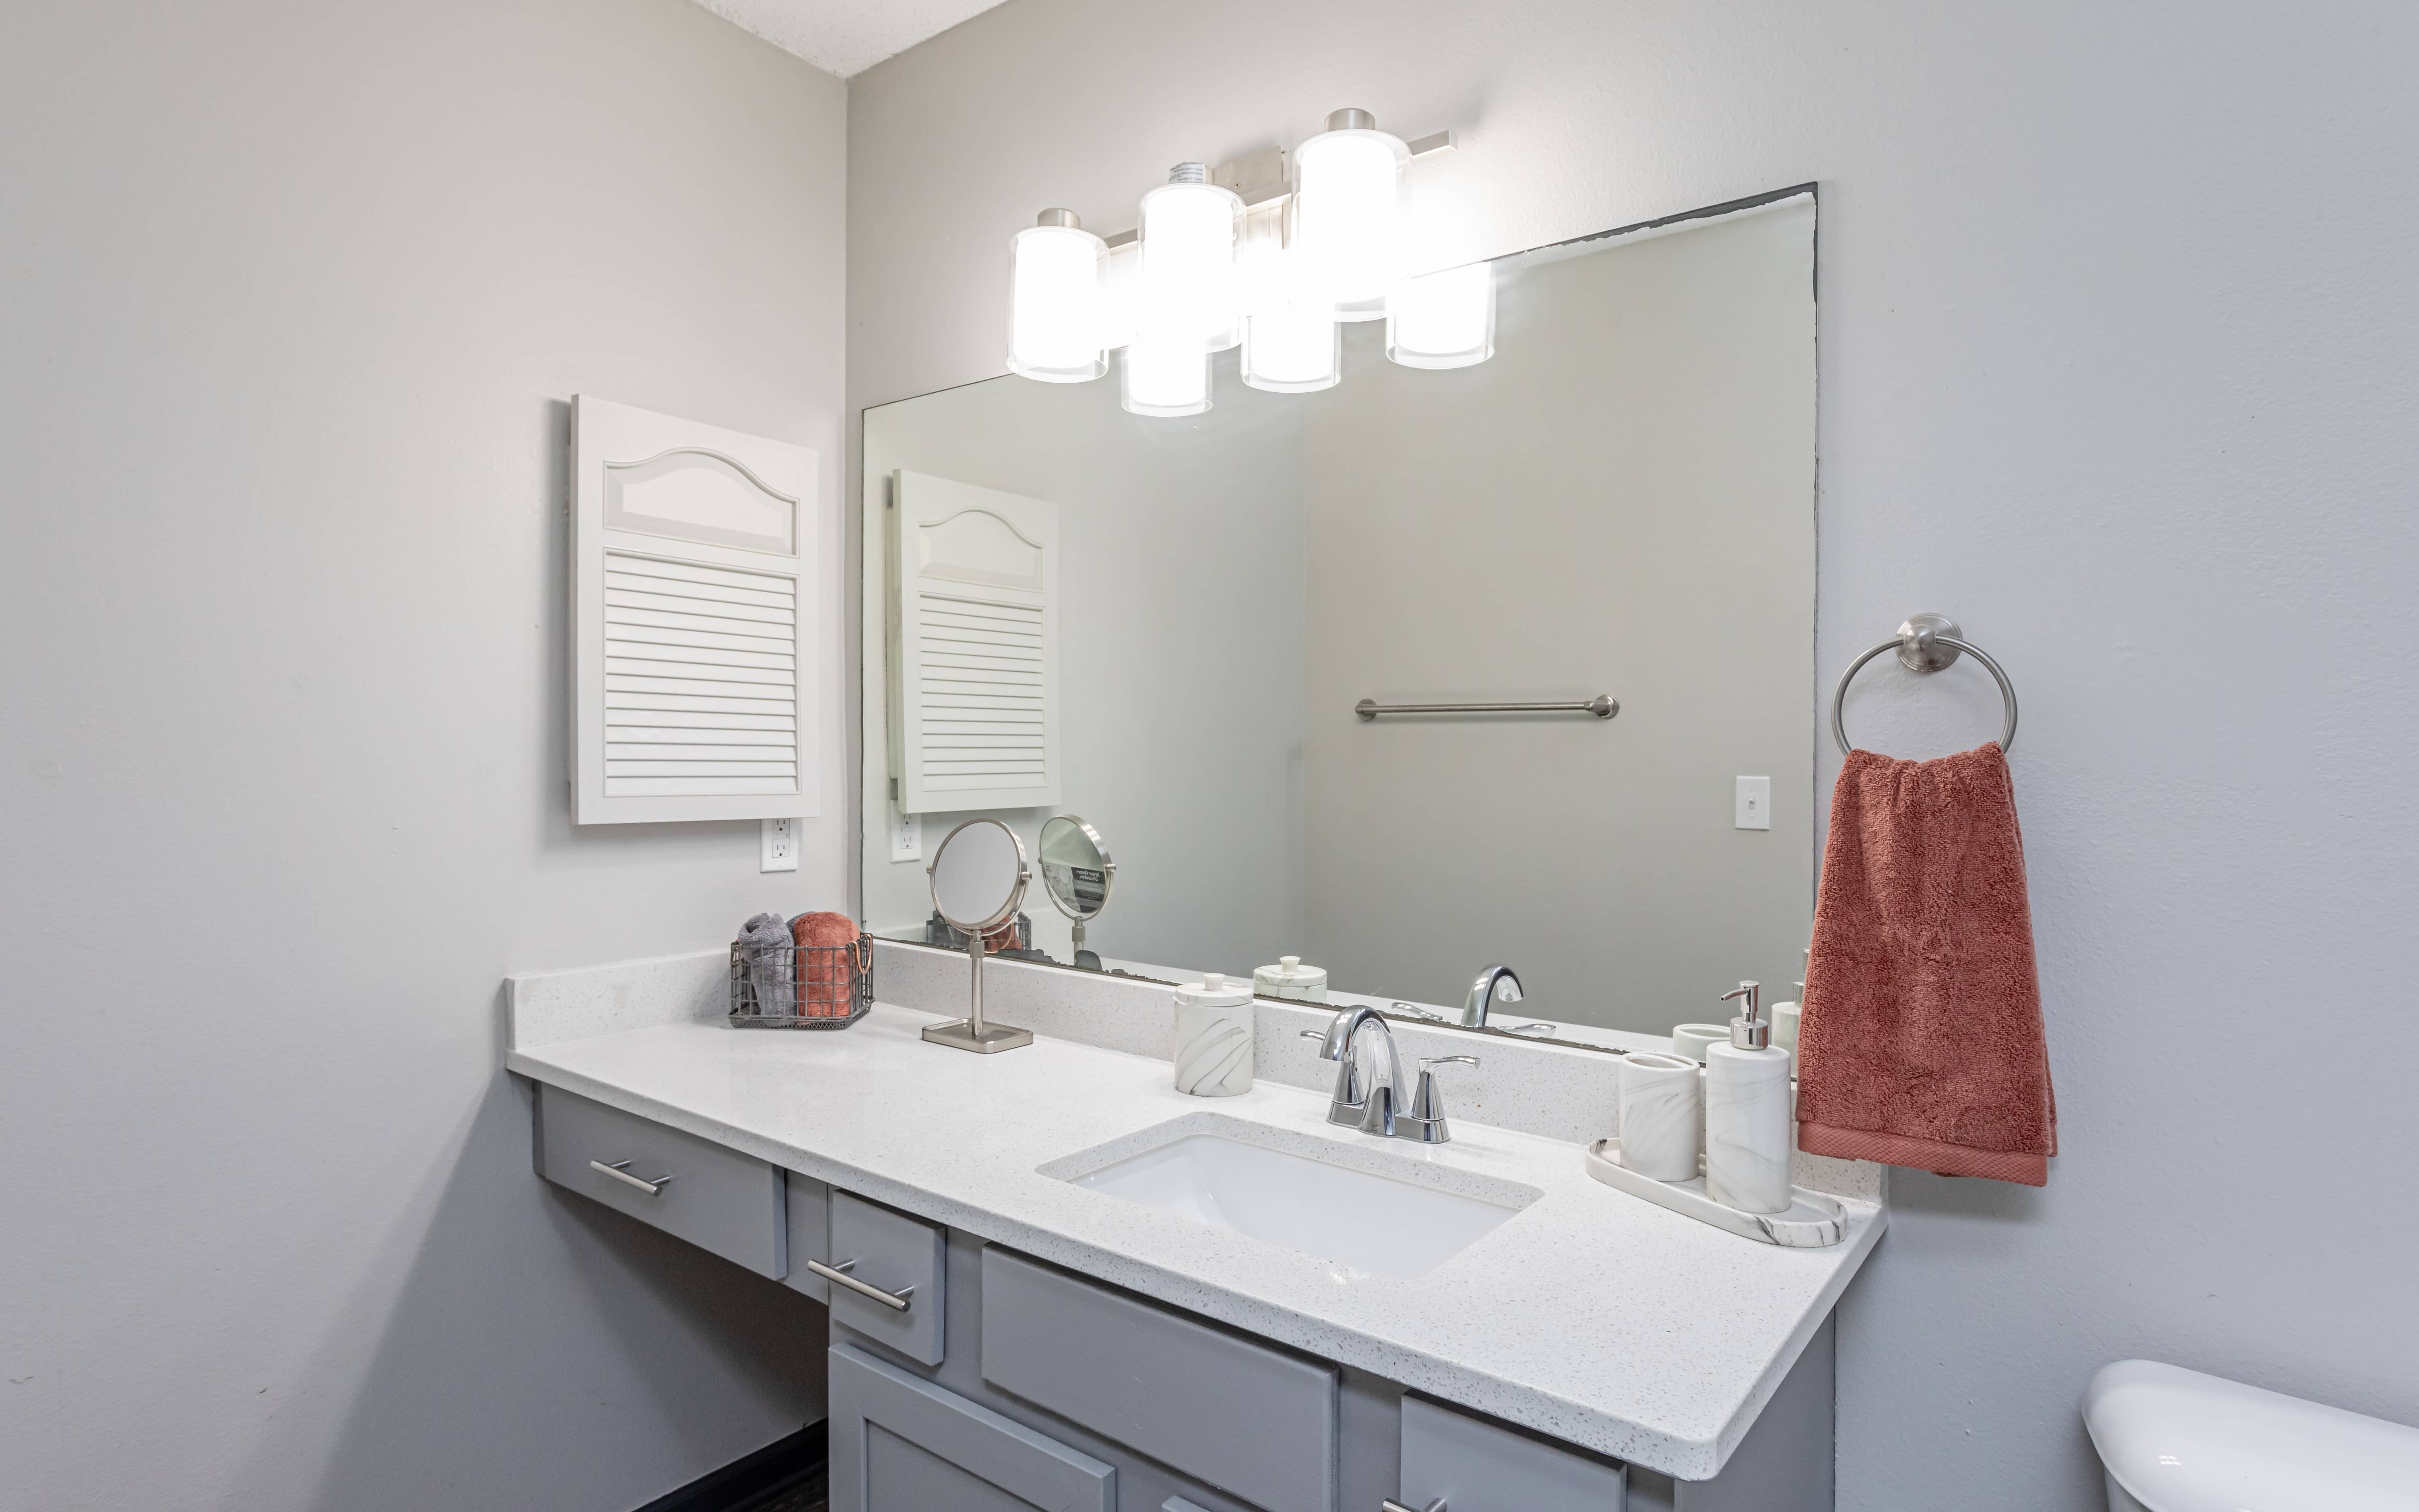 Northwood Park Apartment bathroom with grey cabinets and lighting